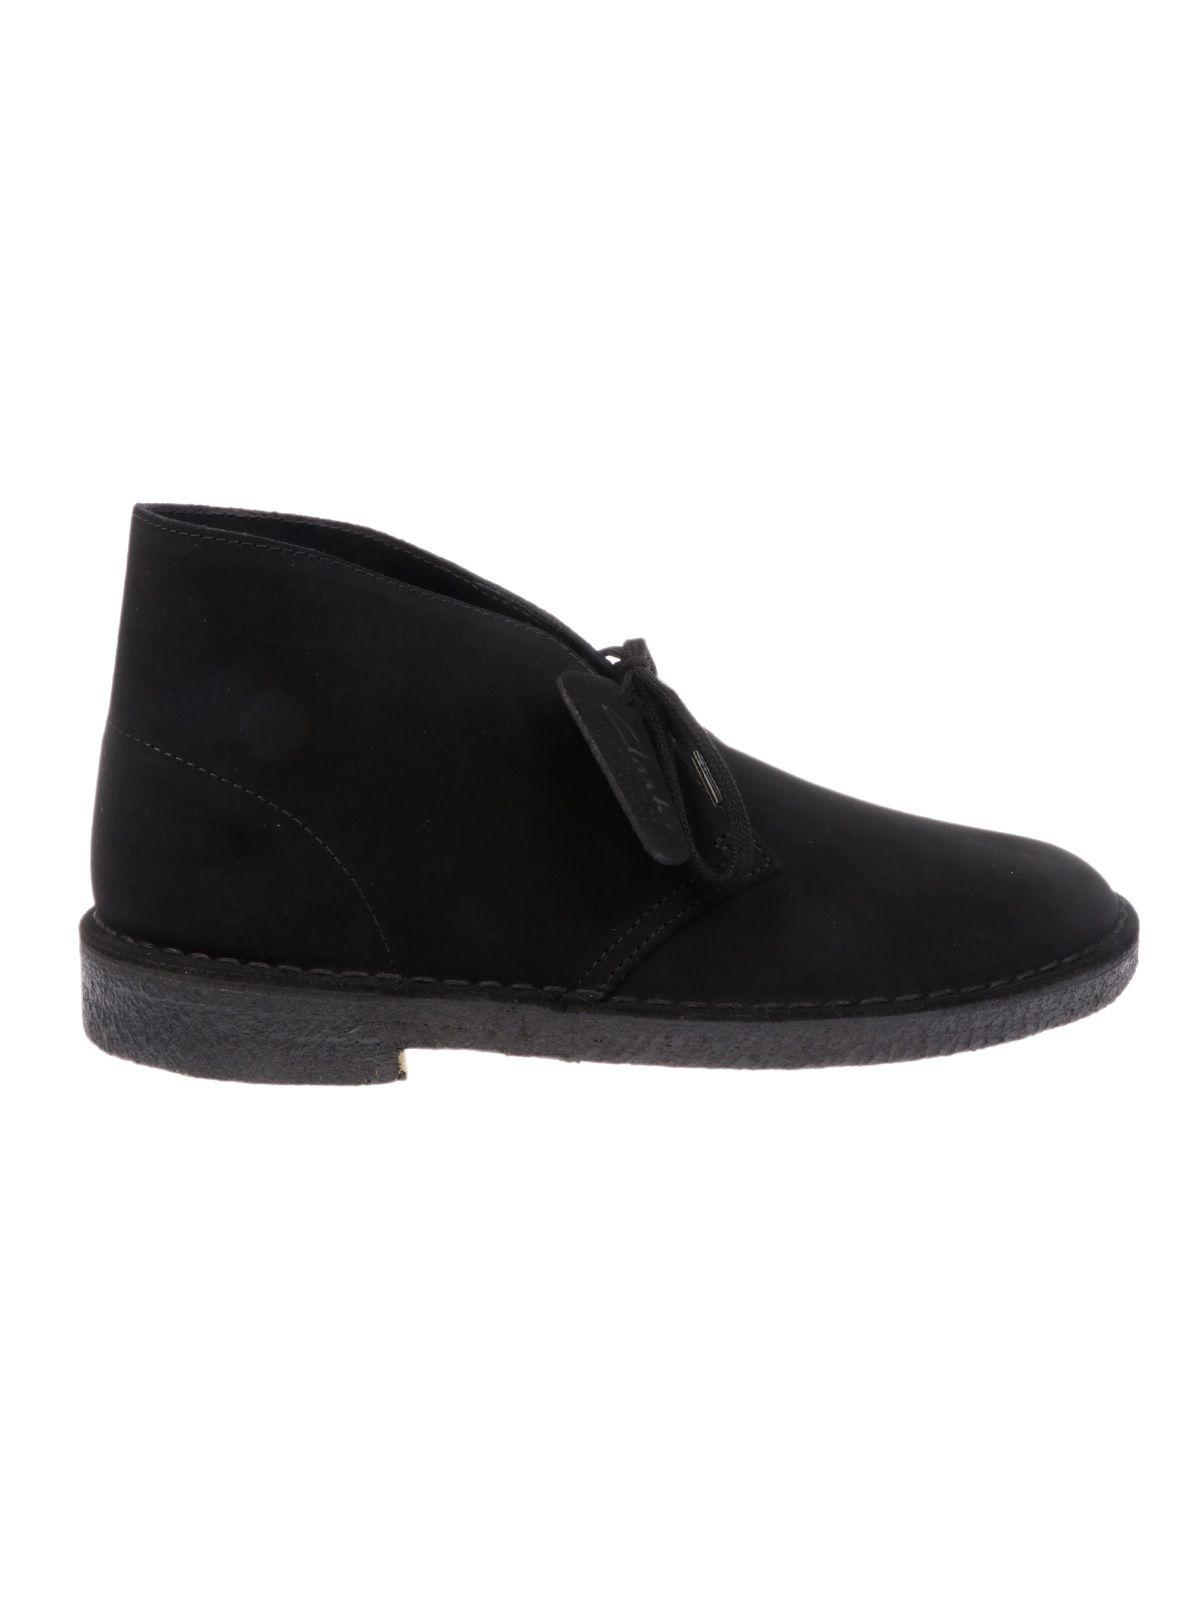 Clarks Black Suede Ankle Boots in Black for Men - Lyst